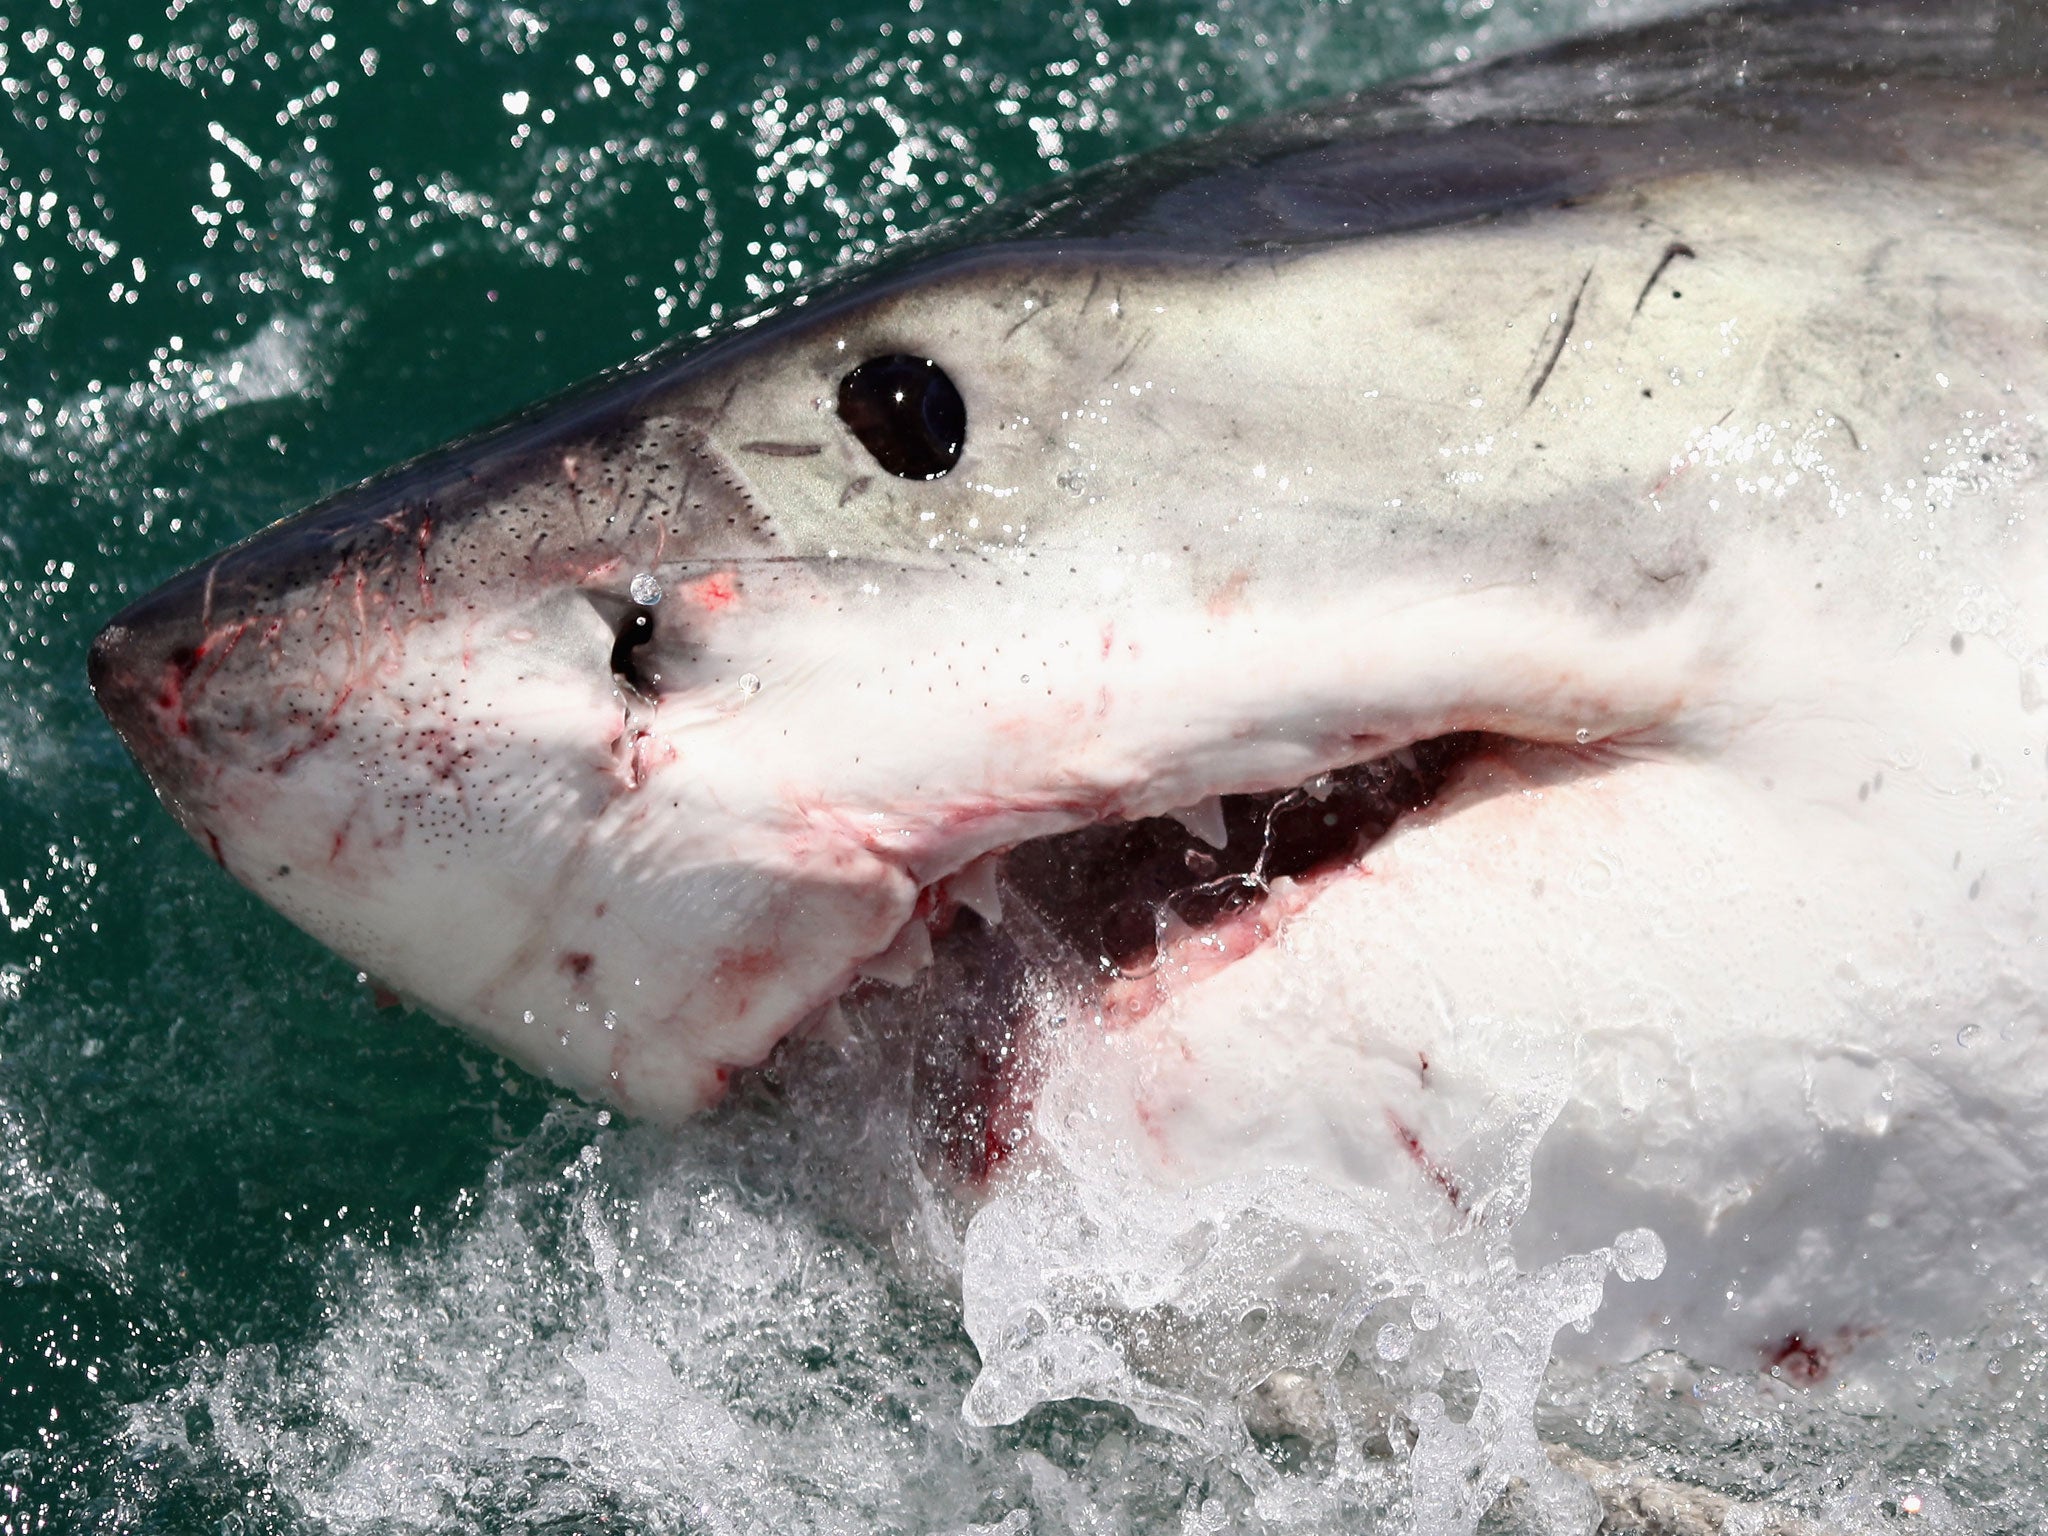 A Great White Shark is attracted by a lure in South Africa. Darren Mills claims he was bitten by a Great White off the coast of New Zealand.